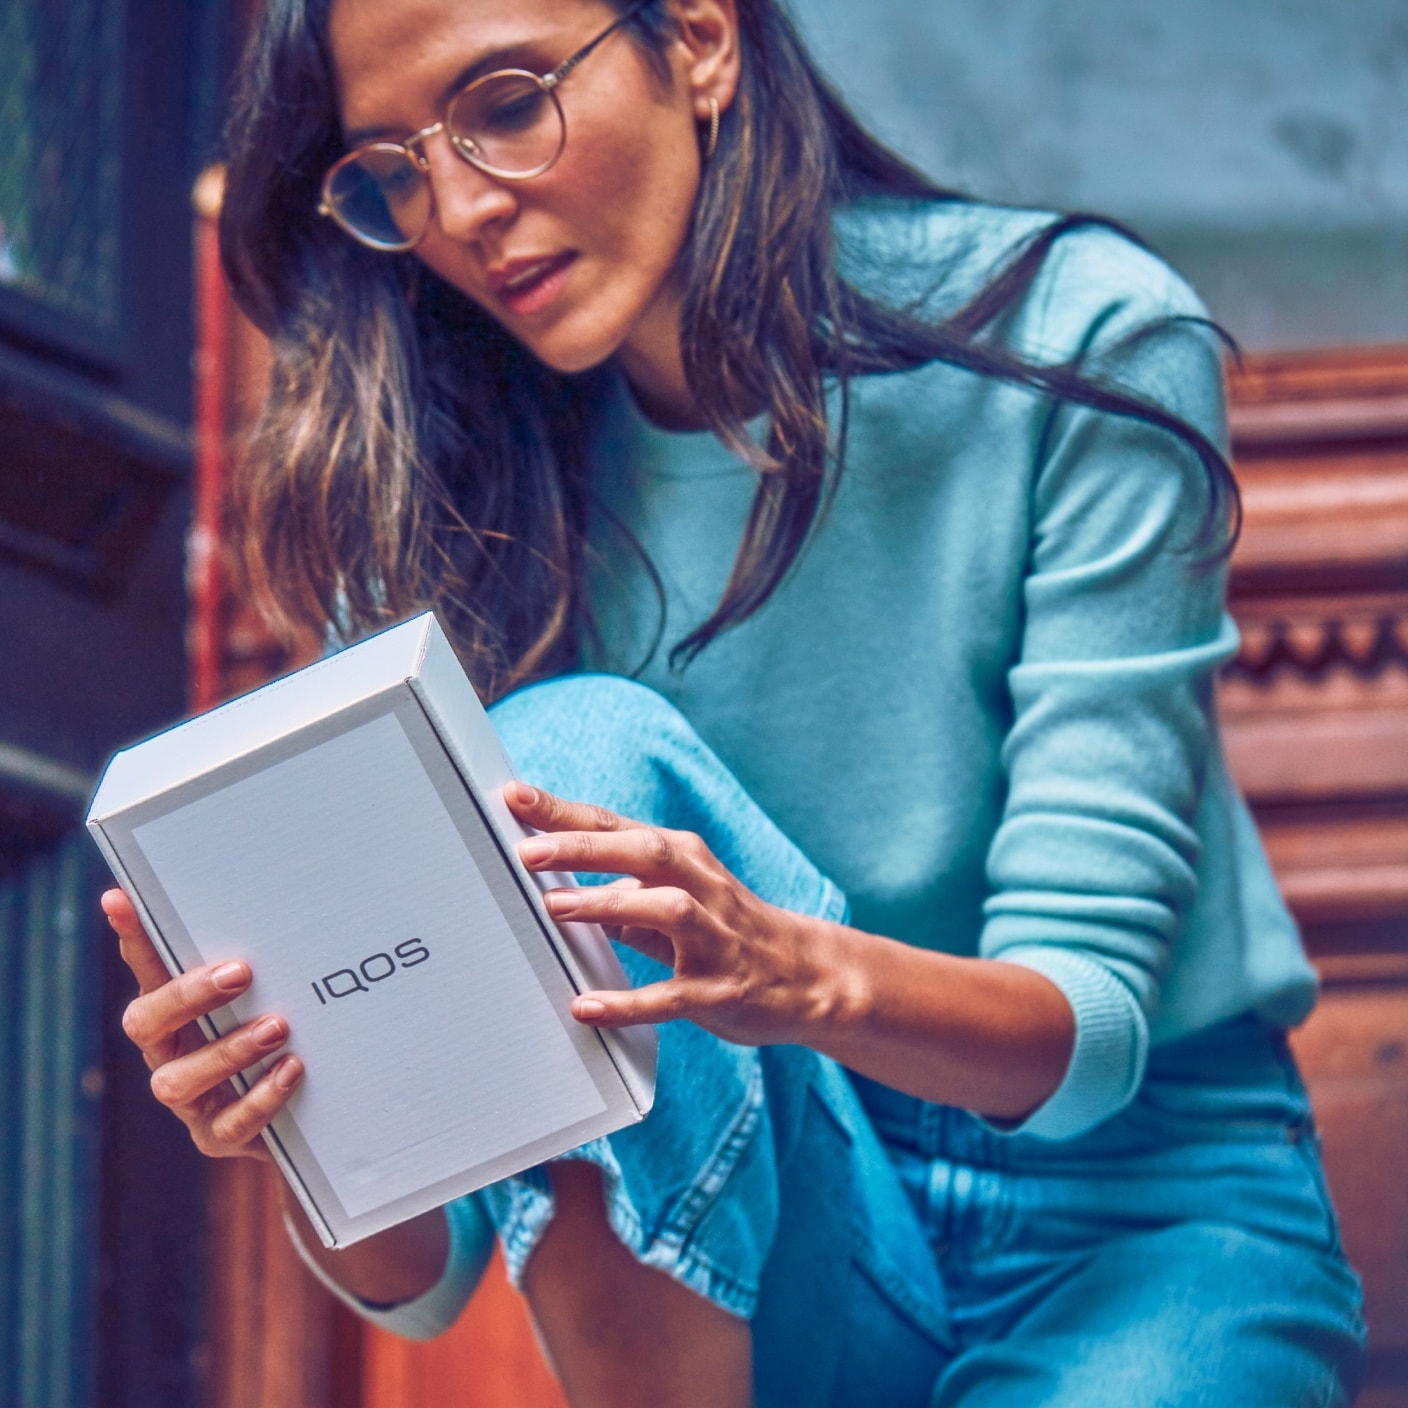 A woman looking at the back of an IQOS box.